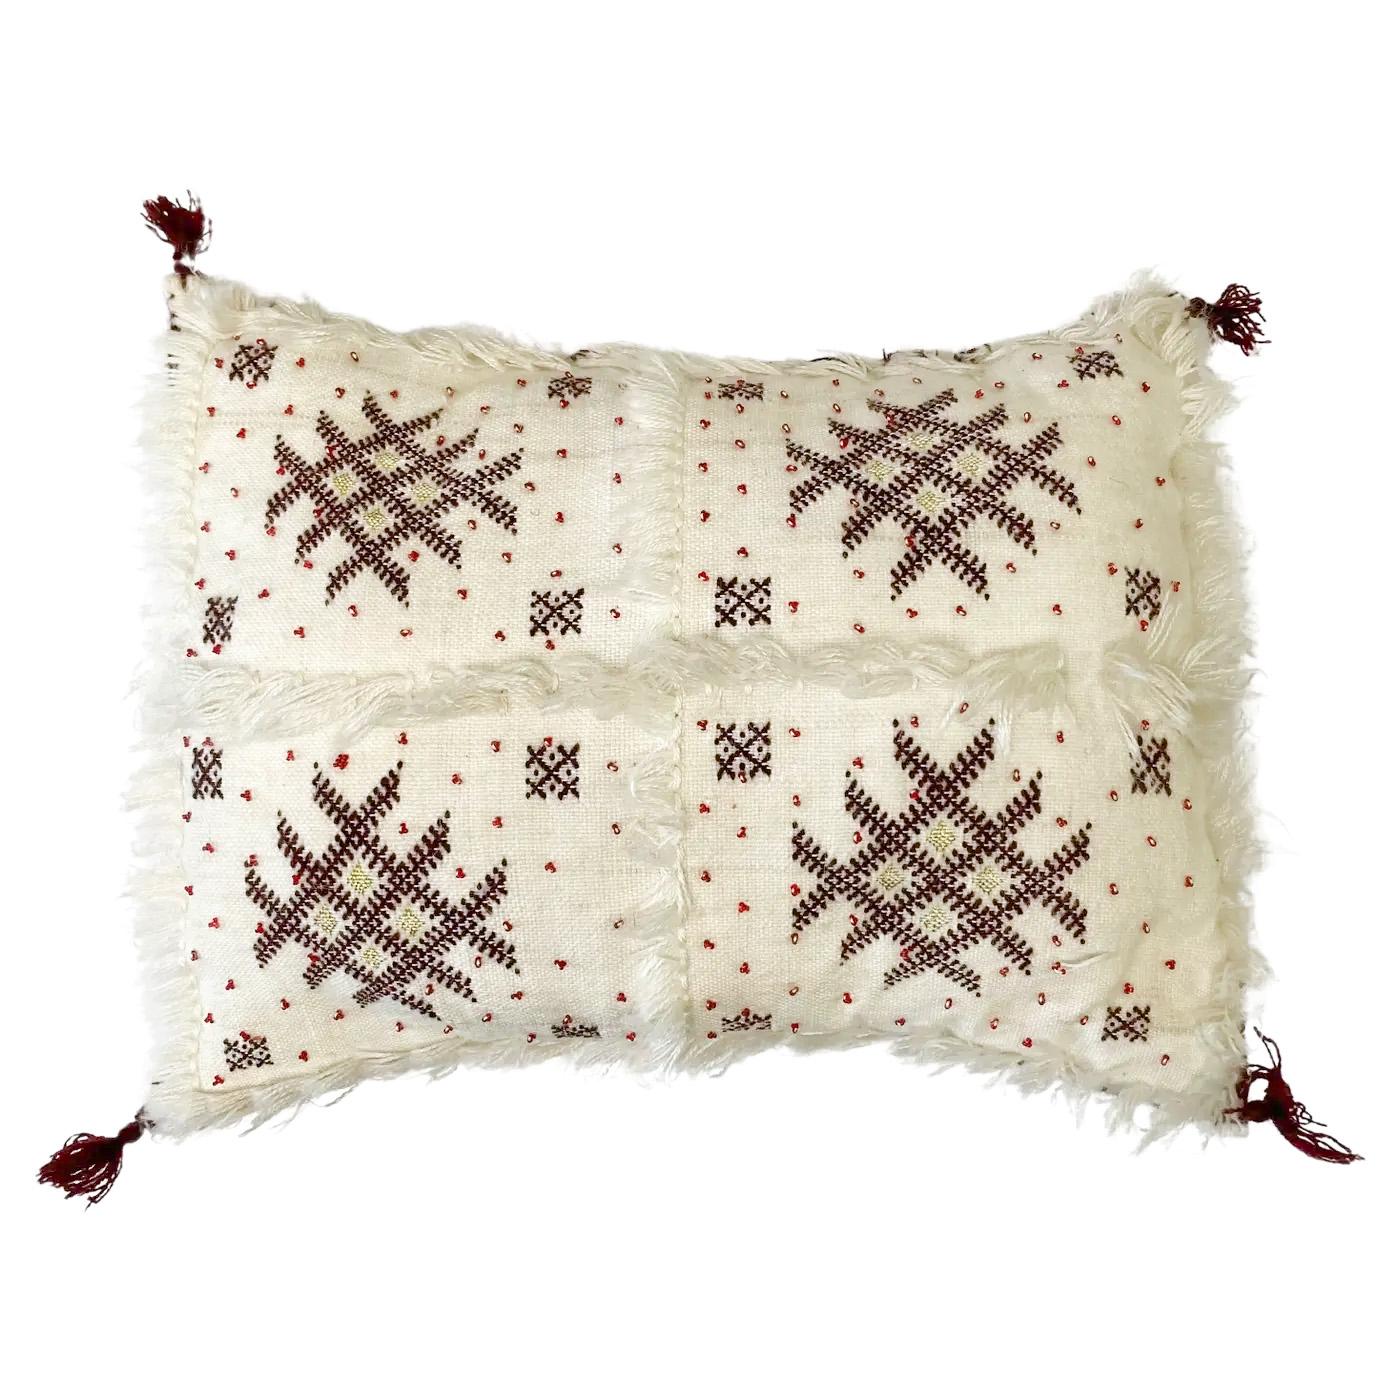 A stunning pair of boho chic Moroccan Handwoven pillows boasting magnificent Berber geometric patterns and refined fringe work. The white pillows are made of soft wool and embellished with red beads and dark purple berber geometrical motifs. The